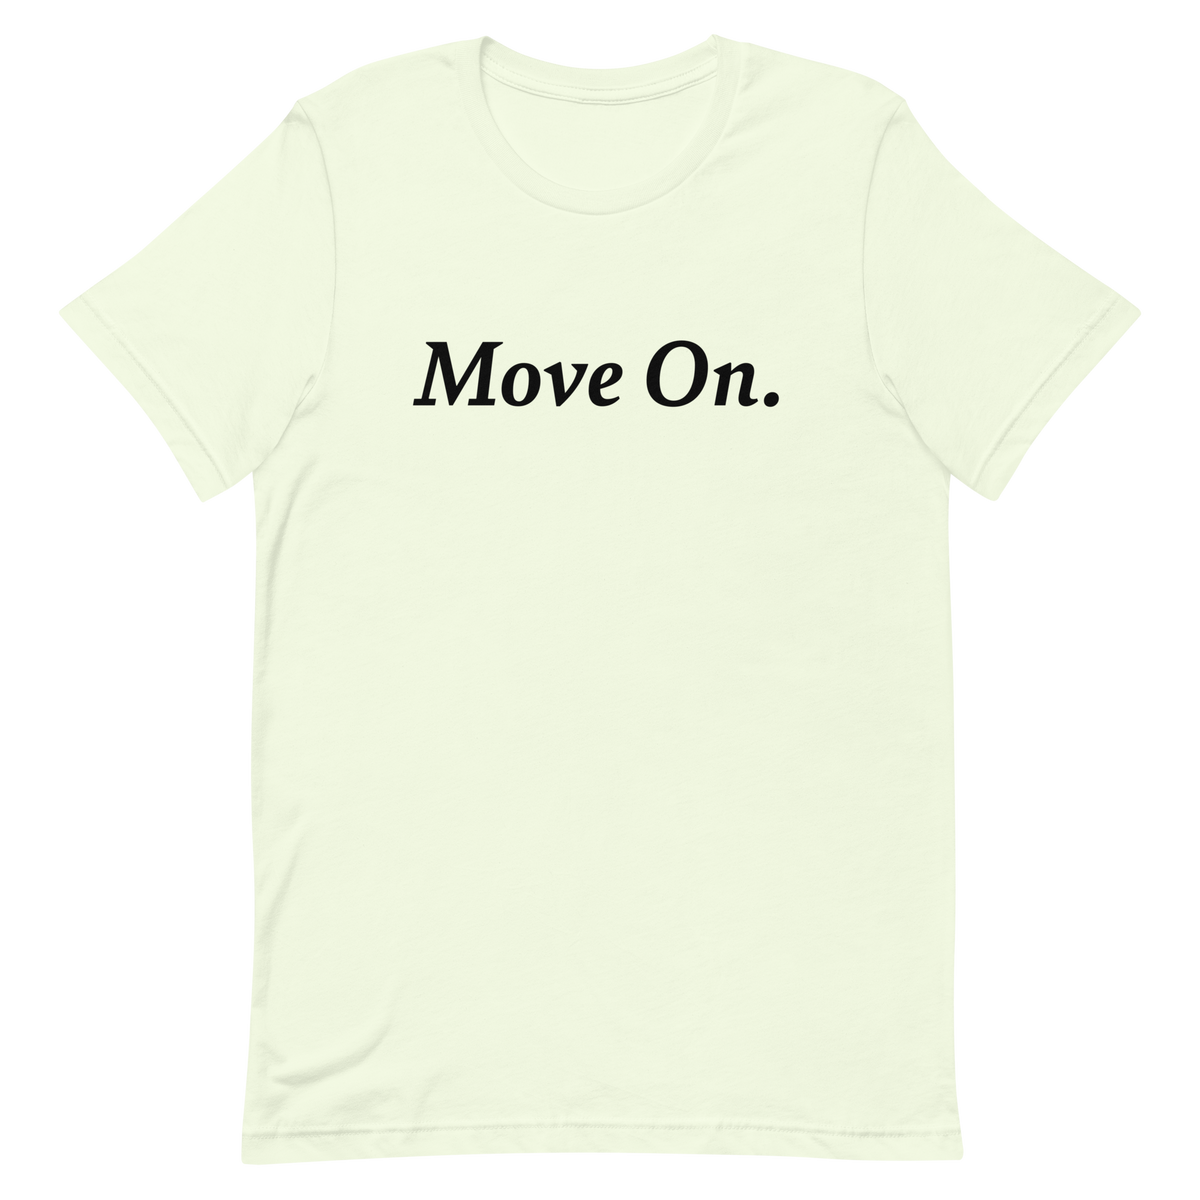 Move On. T-Shirt